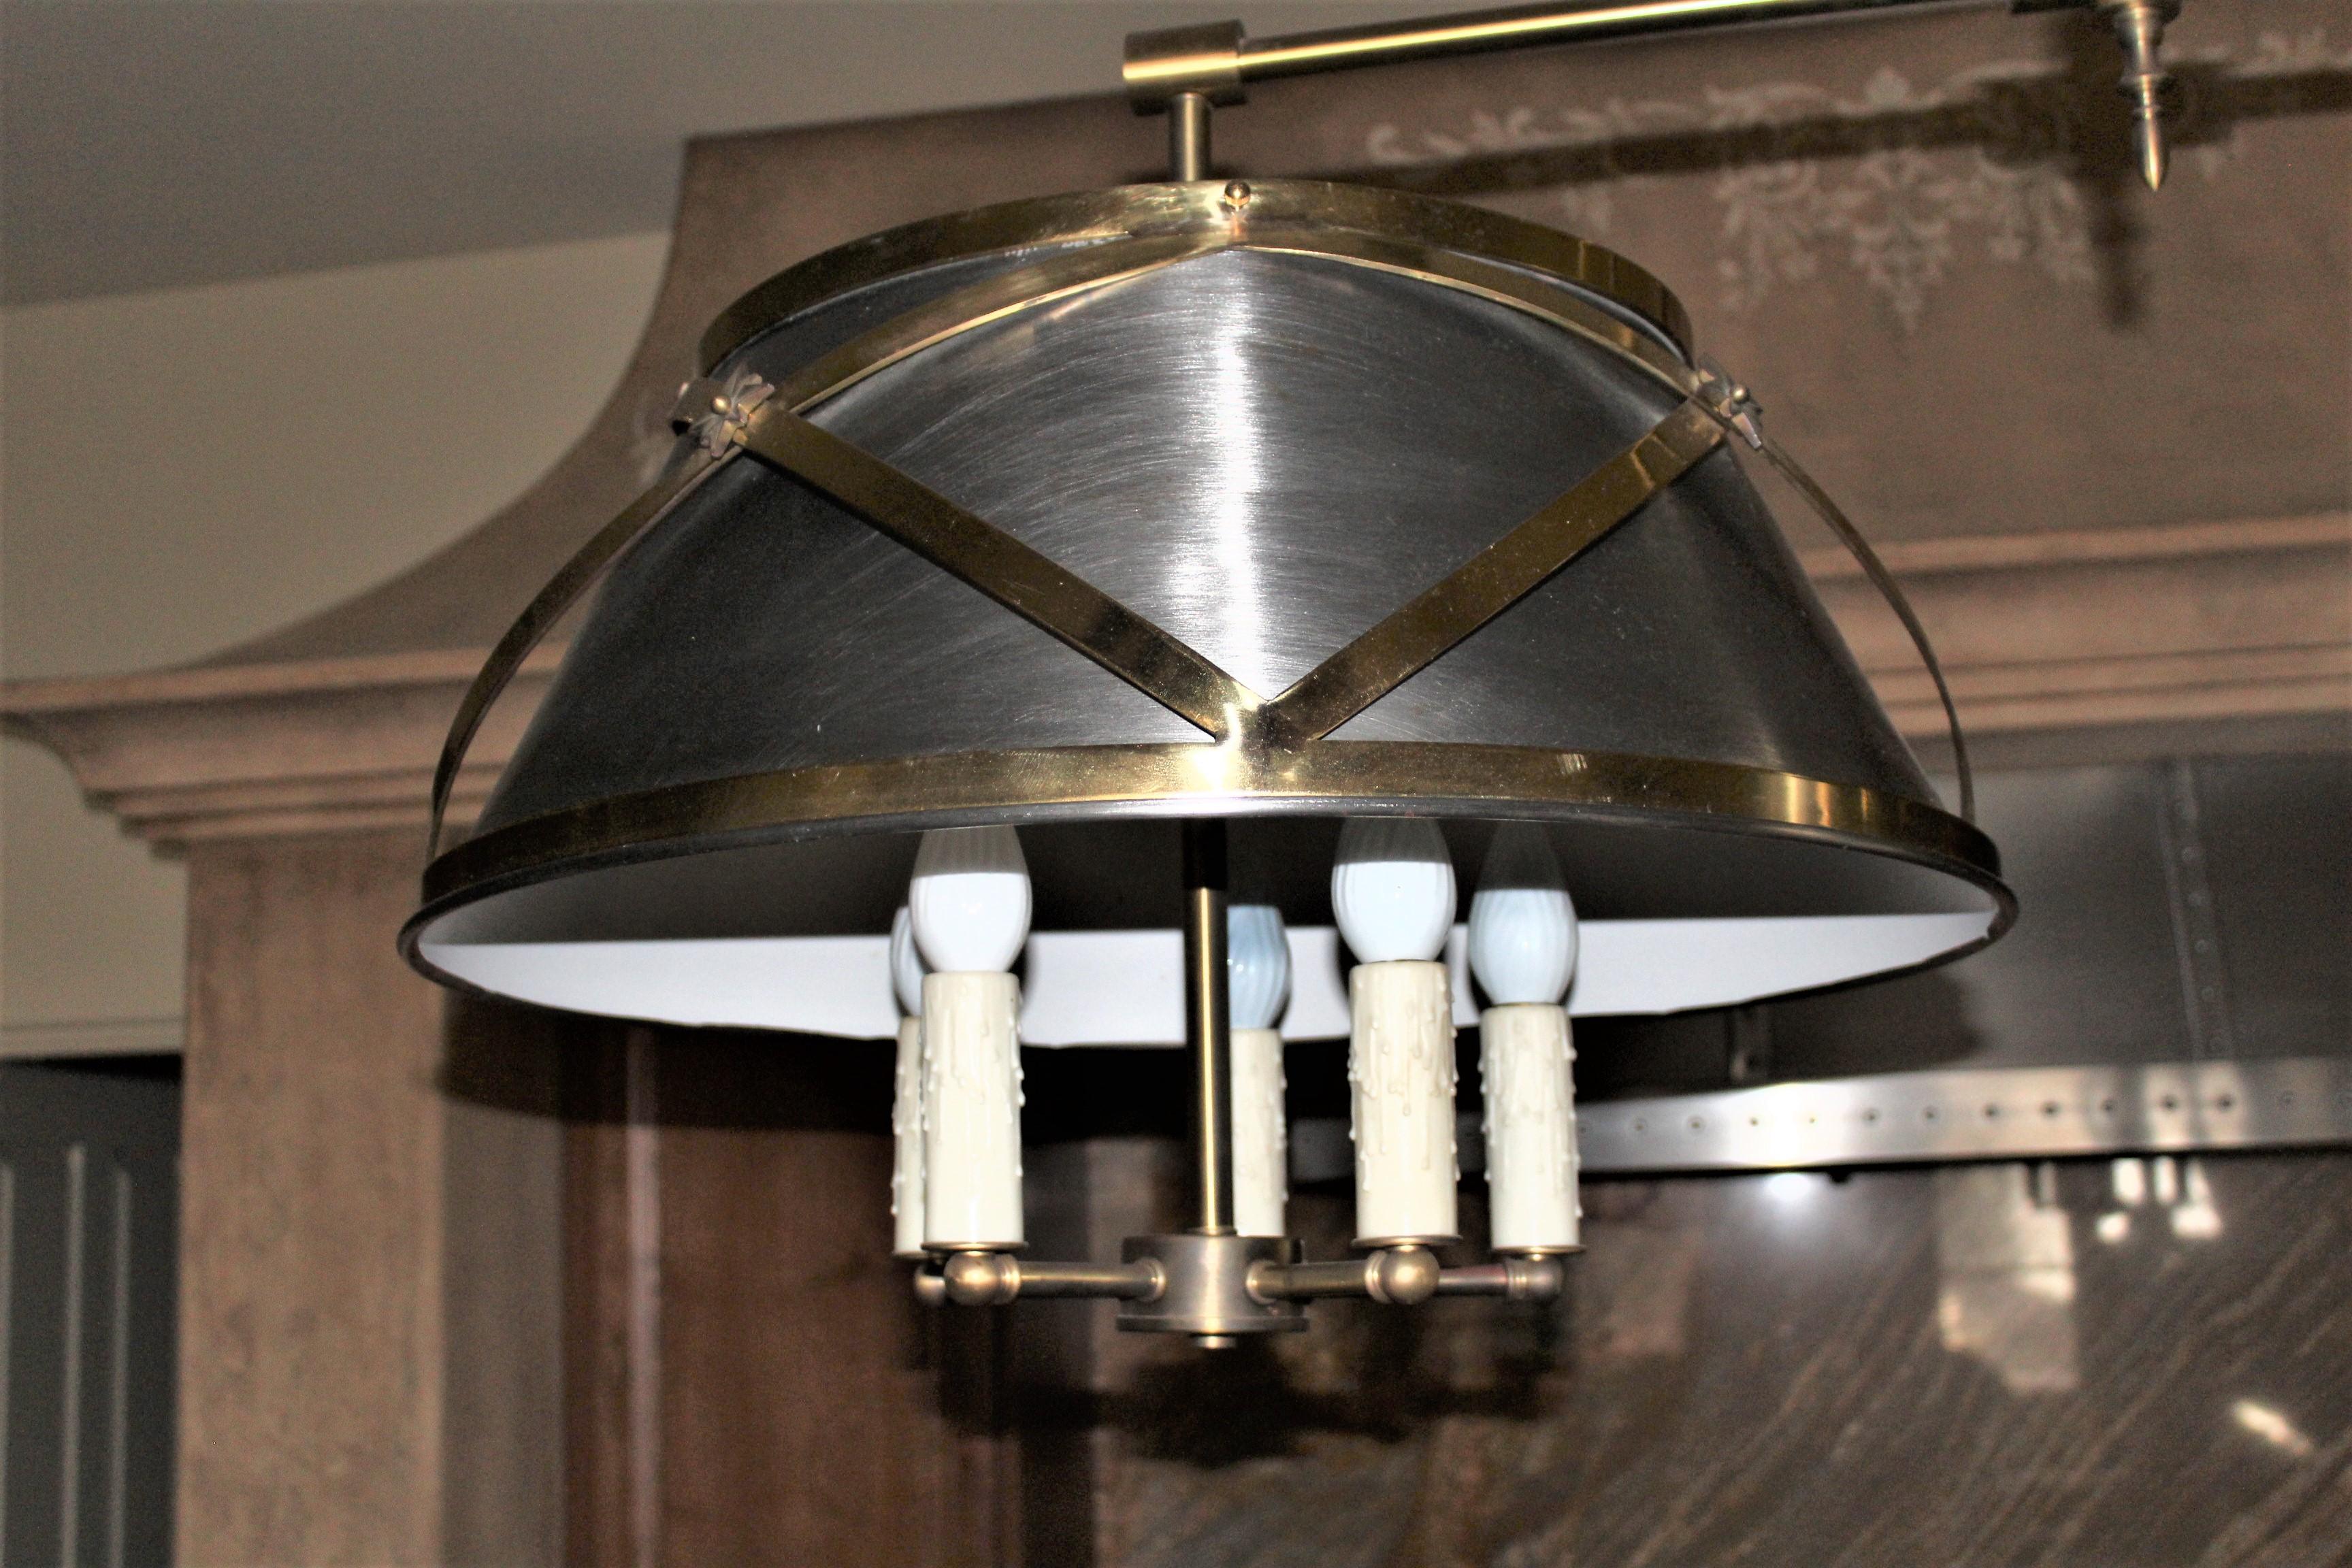 Custom designed for a lighting showroom in LA, double shades hanging from all brass frame. Solid brass X-cross banding. With 5 light cluster bodies. Total 10 lights. Good size for a kitchen counter at 56